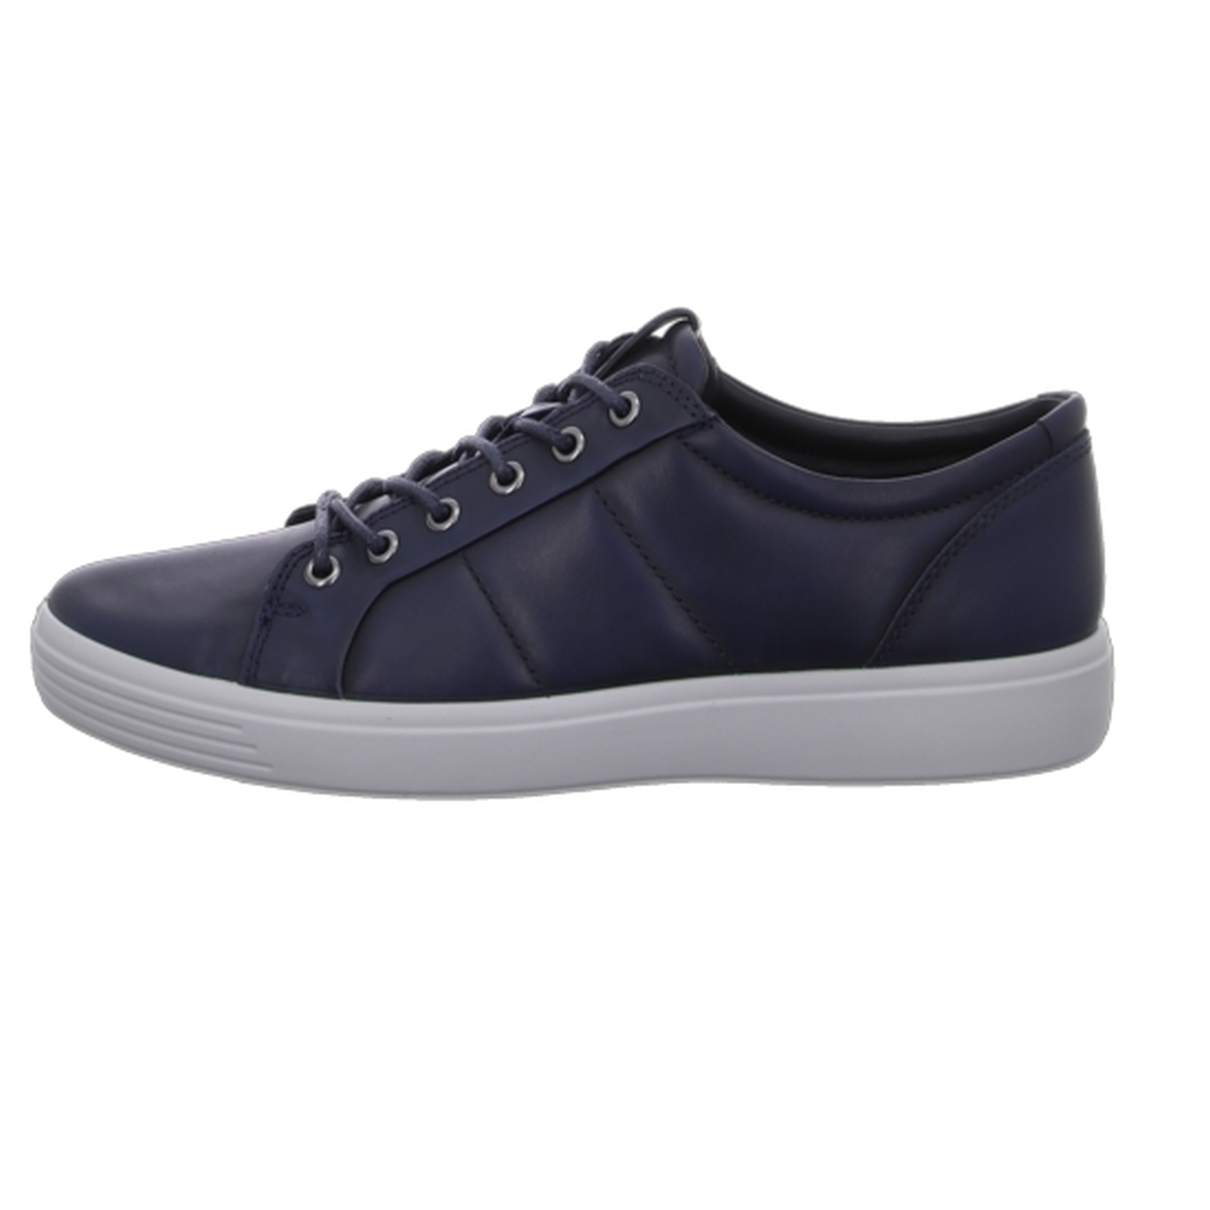 Ecco Soft 7 - Blue smooth leather